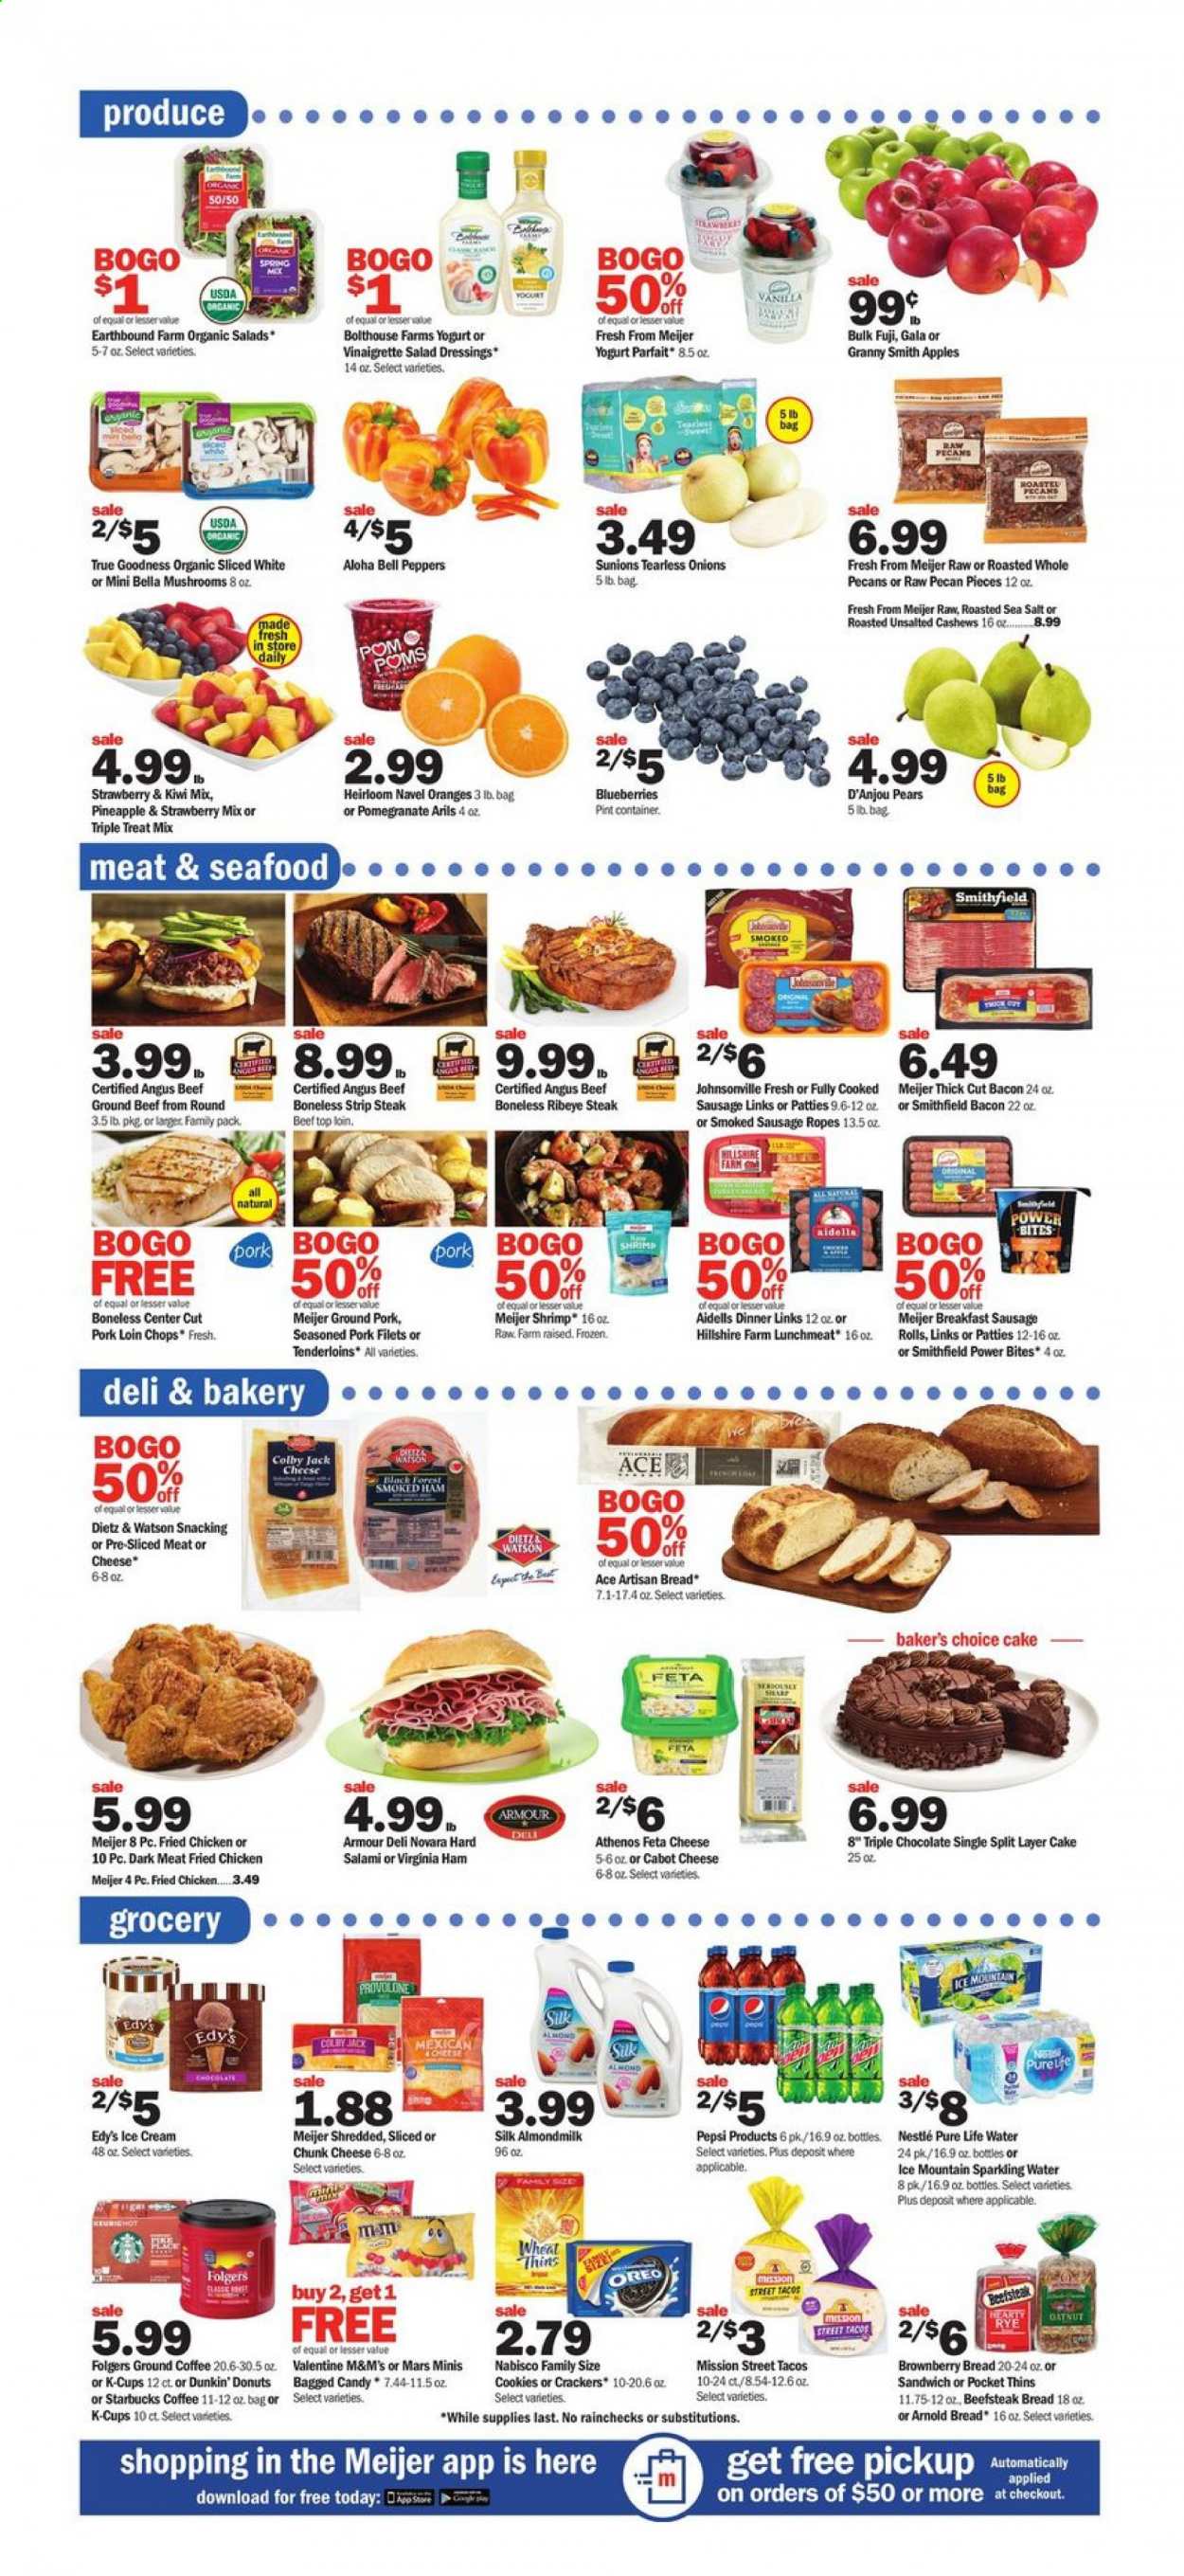 thumbnail - Meijer Flyer - 01/10/2021 - 01/16/2021 - Sales products - mushrooms, blueberries, bread, sausage rolls, tacos, cake, donut, Dunkin' Donuts, apples, pears, oranges, northern pike, seafood, shrimps, sandwich, fried chicken, bacon, salami, ham, Hillshire Farm, smoked ham, virginia ham, Dietz & Watson, sausage, smoked sausage, lunch meat, Colby cheese, feta, chunk cheese, Oreo, yoghurt, almond milk, Silk, bell peppers, cookies, Nestlé, chocolate, Mars, M&M's, crackers, Thins, sea salt, salad dressing, vinaigrette dressing, cashews, pecans, Pepsi, sparkling water, Pure Life Water, Ice Mountain, coffee, Starbucks, Folgers, ground coffee, coffee capsules, K-Cups, beef meat, beef steak, ground beef, steak, ribeye steak, striploin steak, ground pork, pork loin, pork meat, Bella, Ace. Page 3.